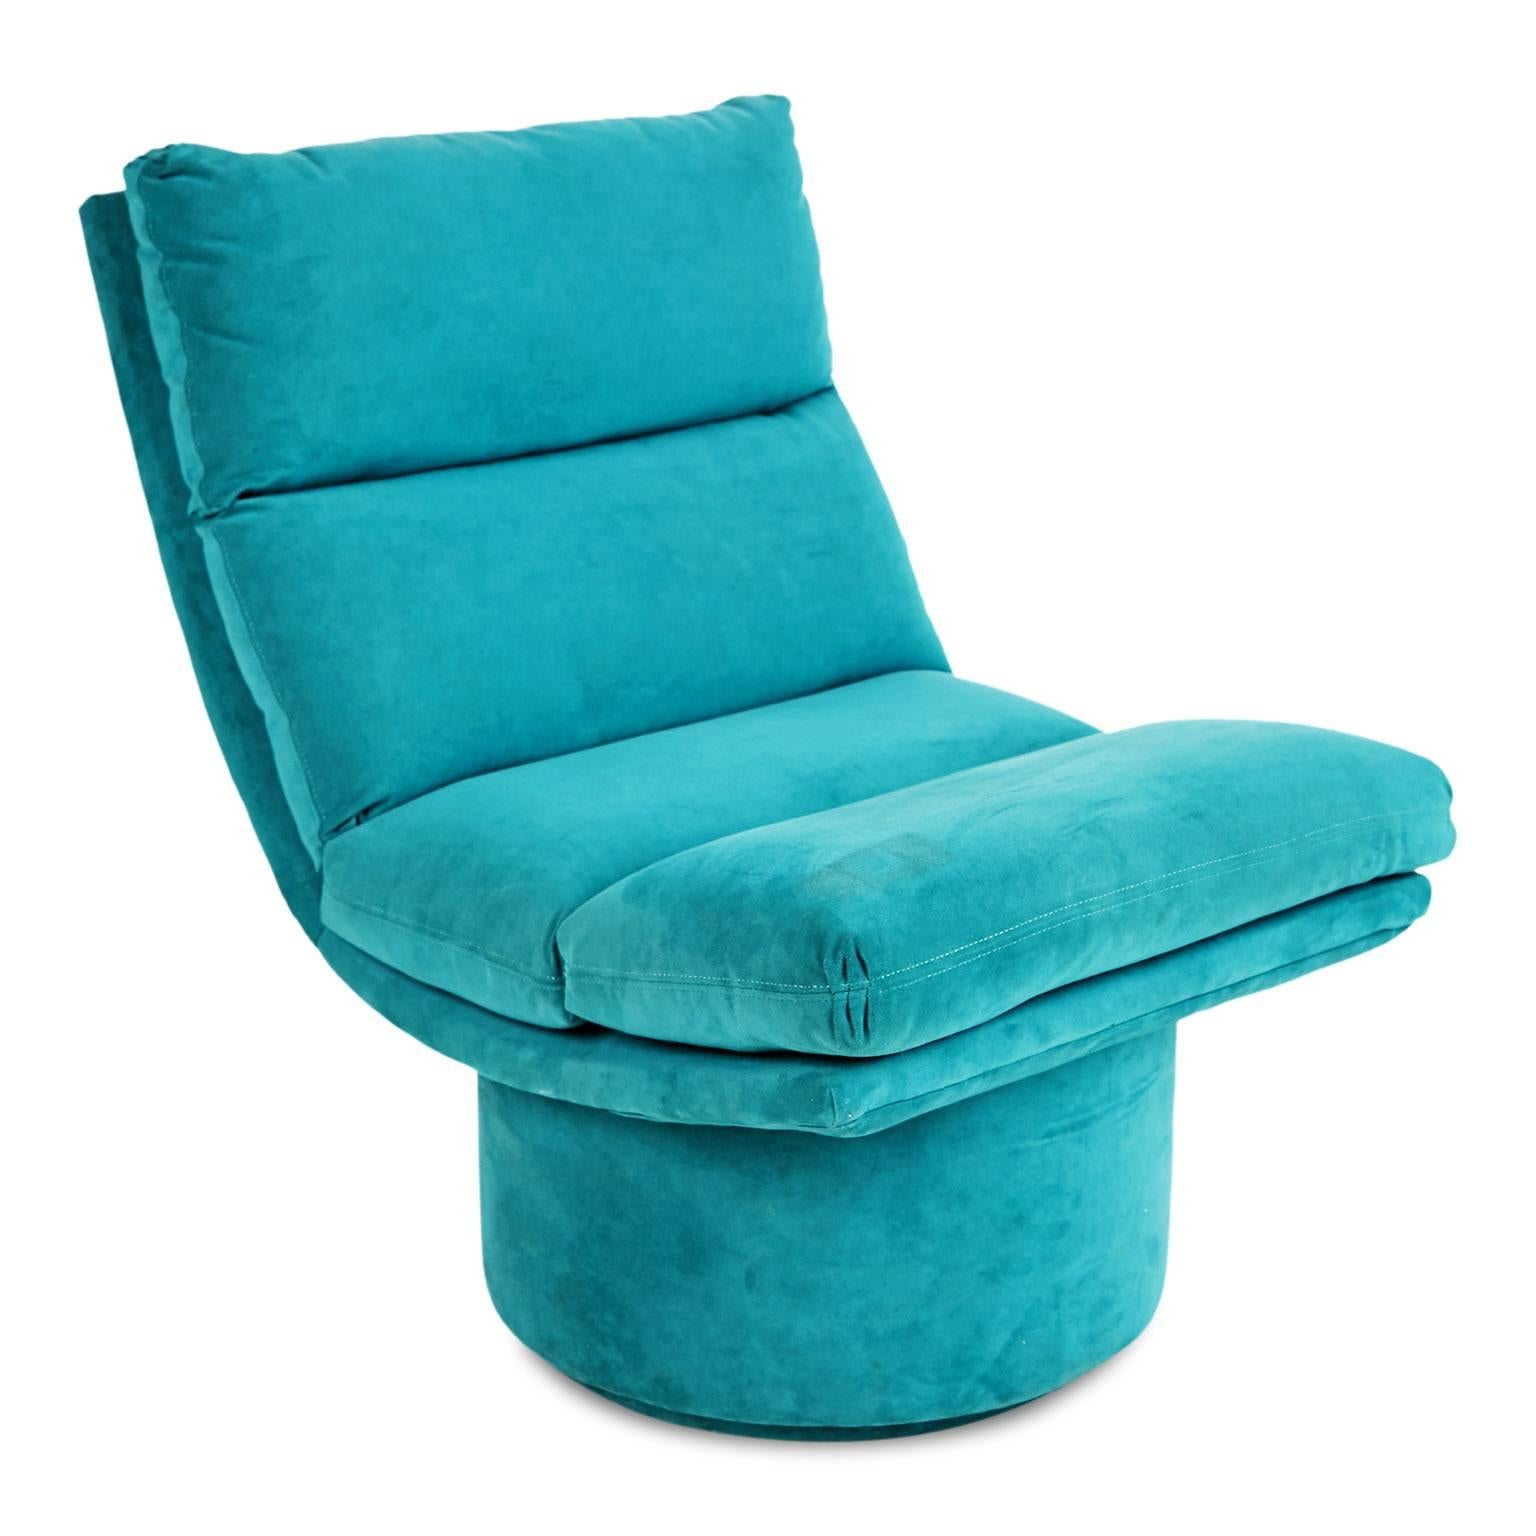 Note, this item is being offered as a reupholstery project. We can reupholster this in your material of choice or sell to you as-is so that you can select a local upholsterer of your choice. Price is as-is. Contact us for a reupholstery quote if you